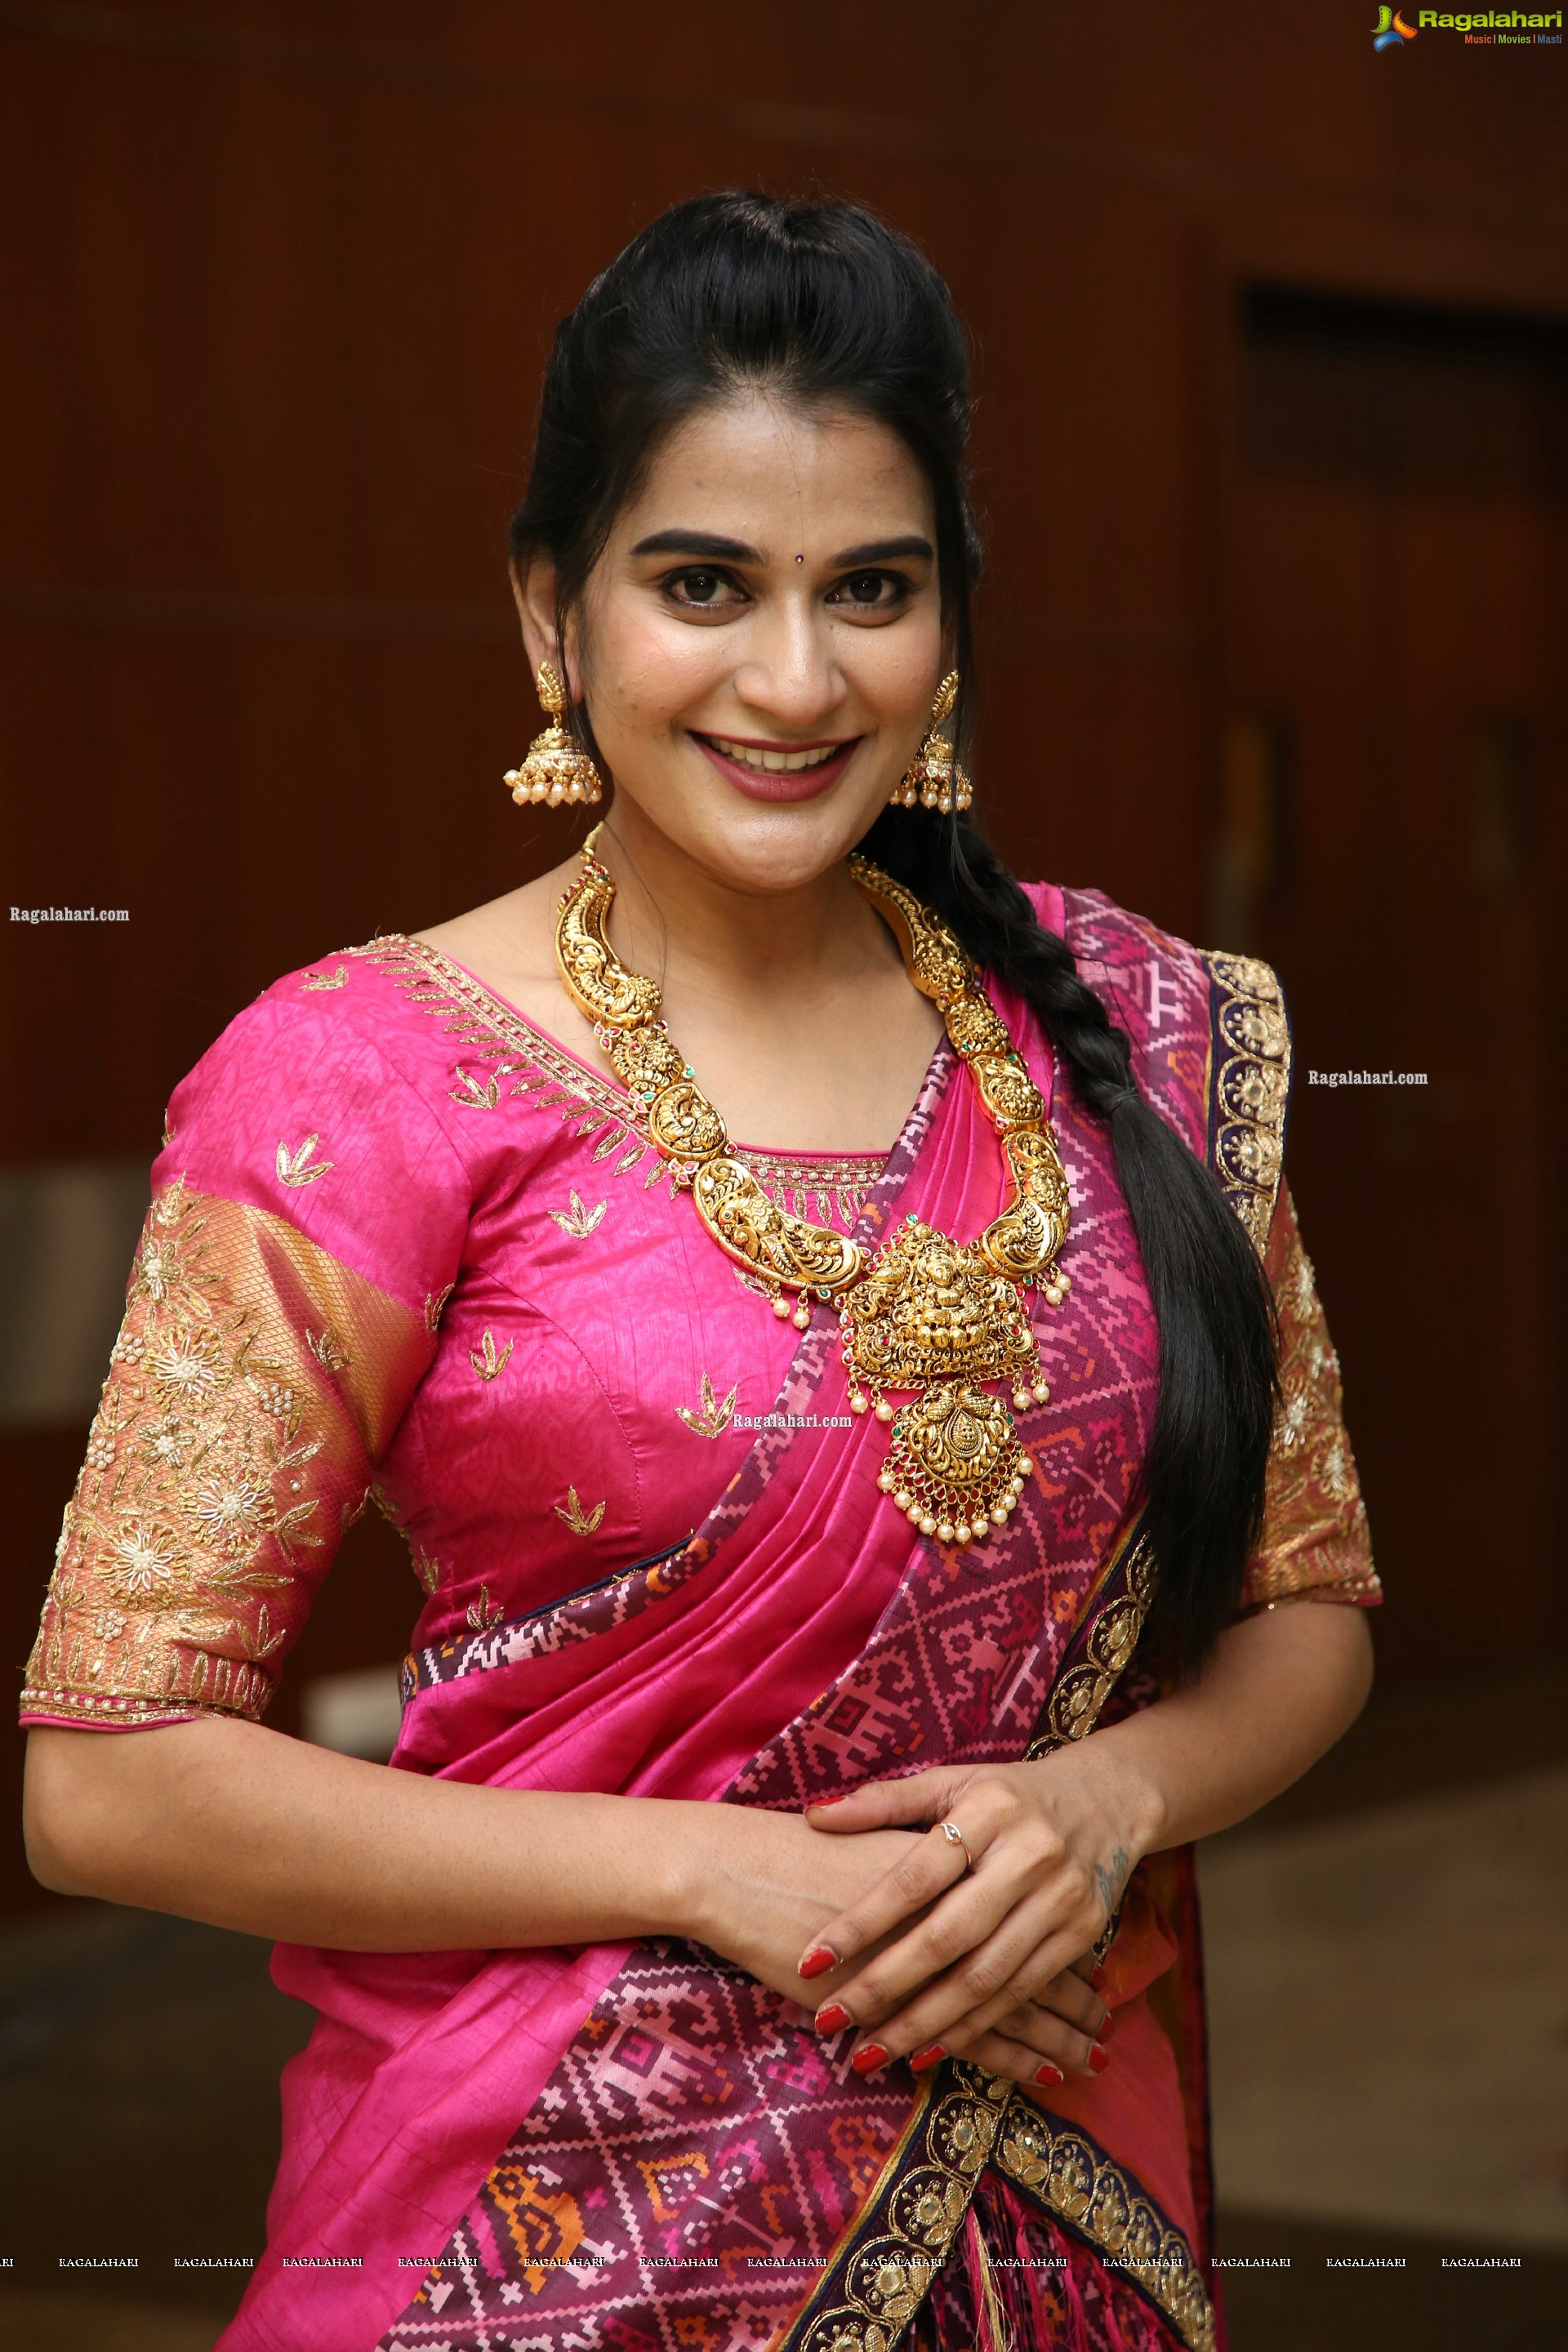 Jenny Honey in Pink Lehenga and Stunning Ornaments, HD Photo Gallery